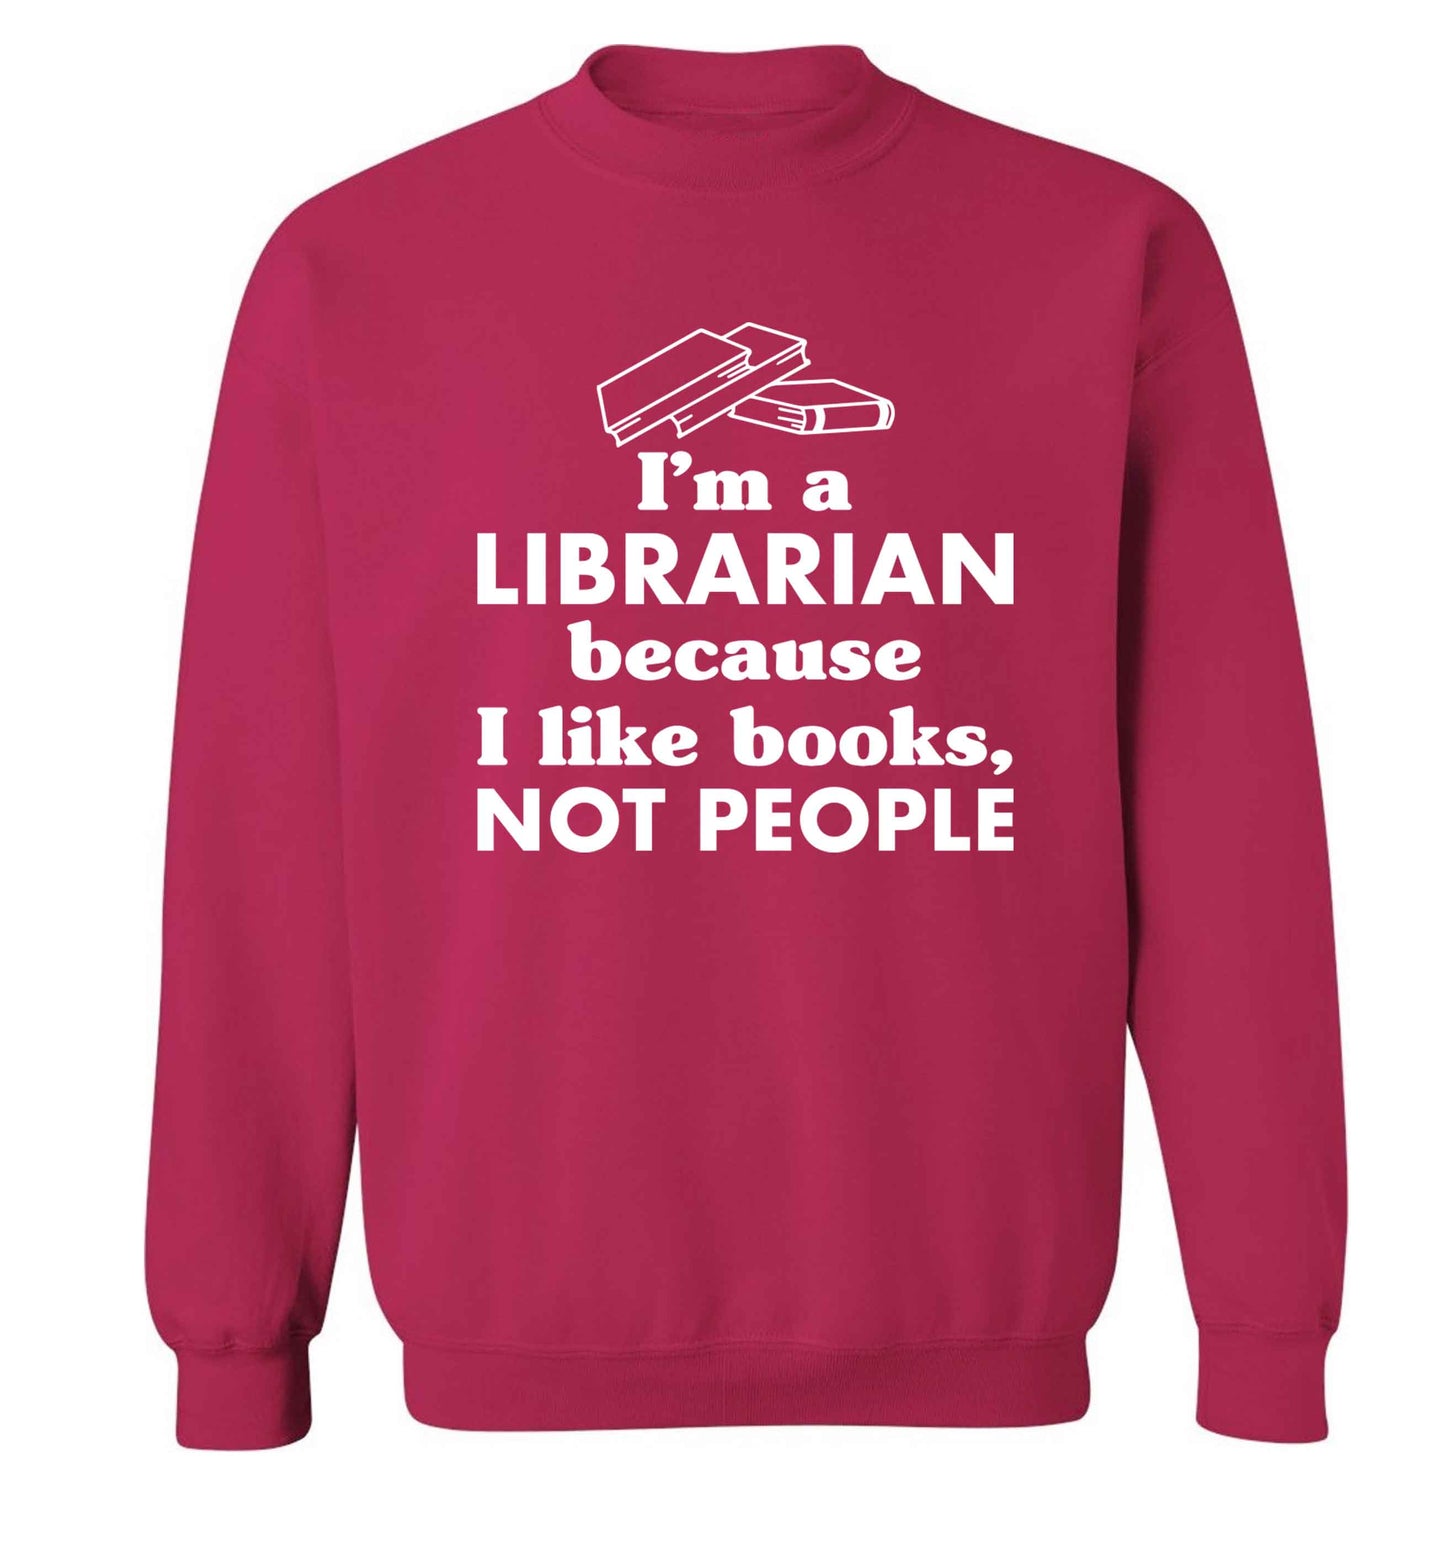 I'm a librarian because I like books not people Adult's unisex pink Sweater 2XL